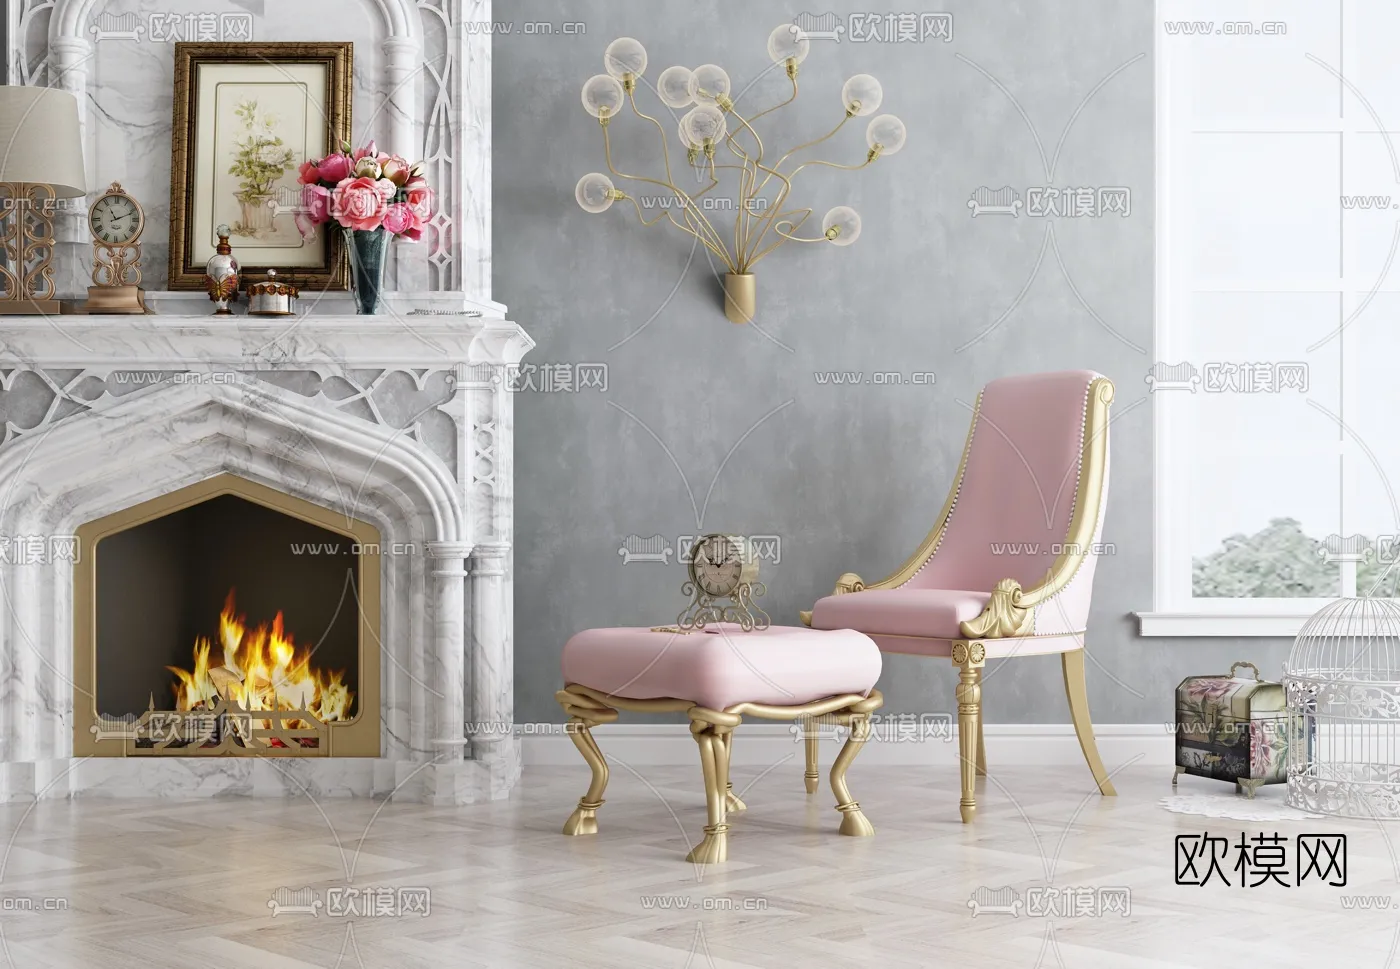 CLASSIC – FIREPLACE 3DMODELS – 062